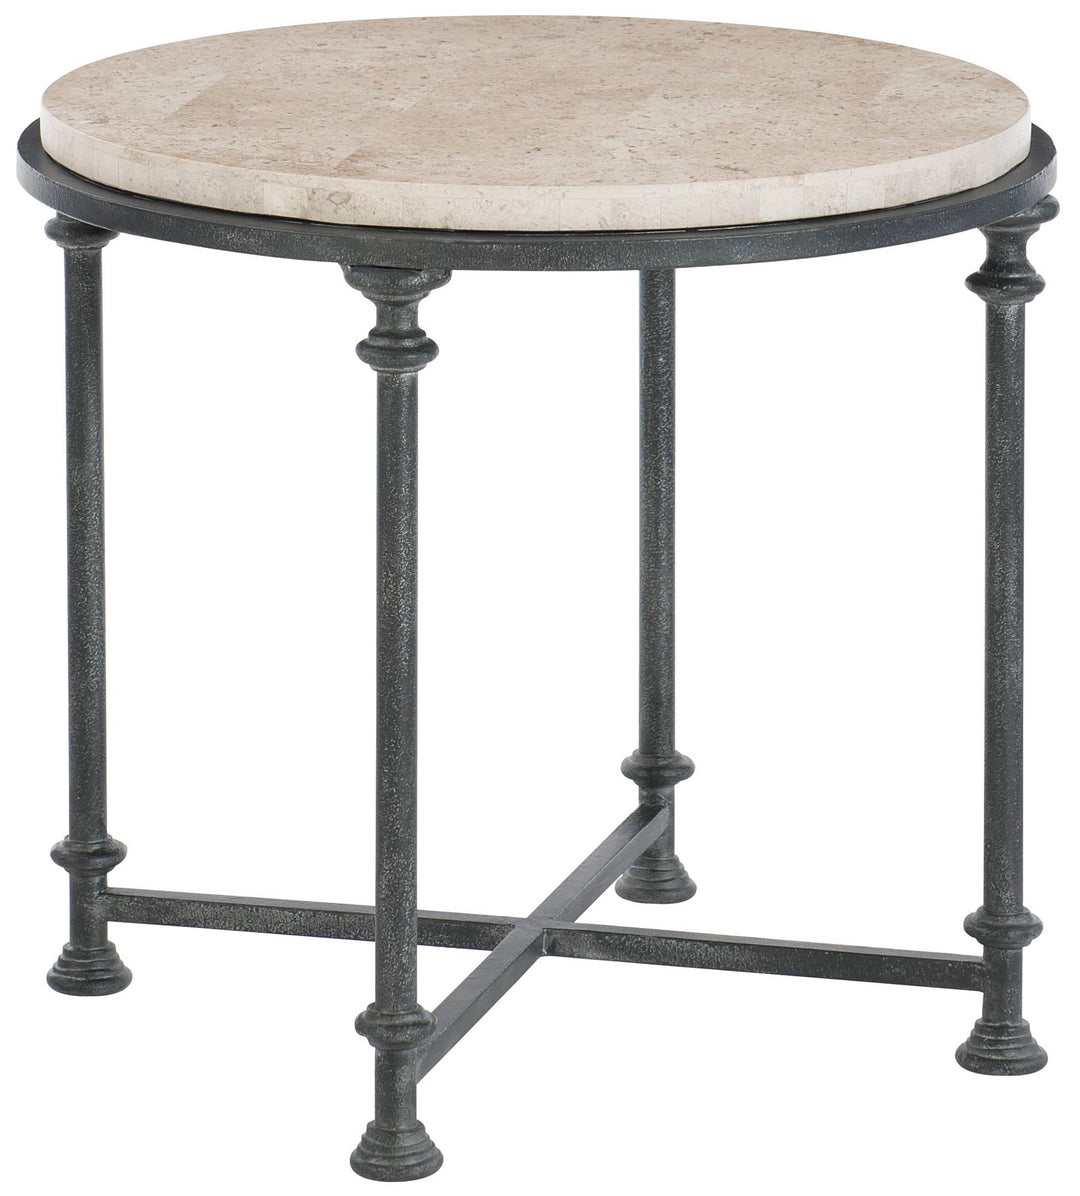 GALESBURY END TABLE RIUND